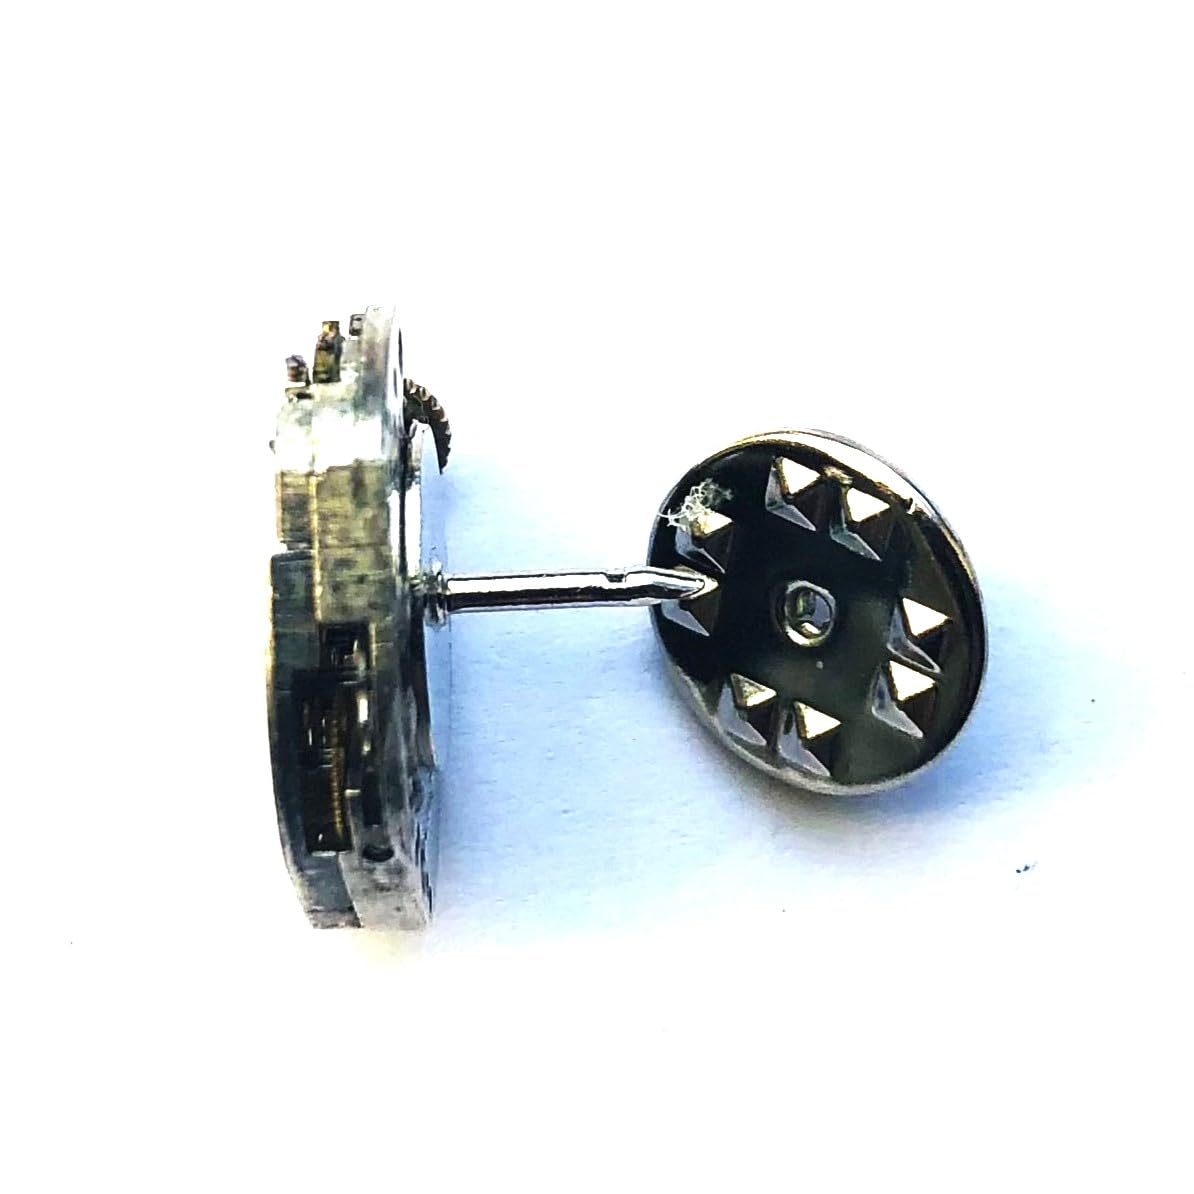 Steampunk Tie Pin Small Vintage Watch Movement Father's Day Tie Tack Lapel Pin Mechanical Jewel